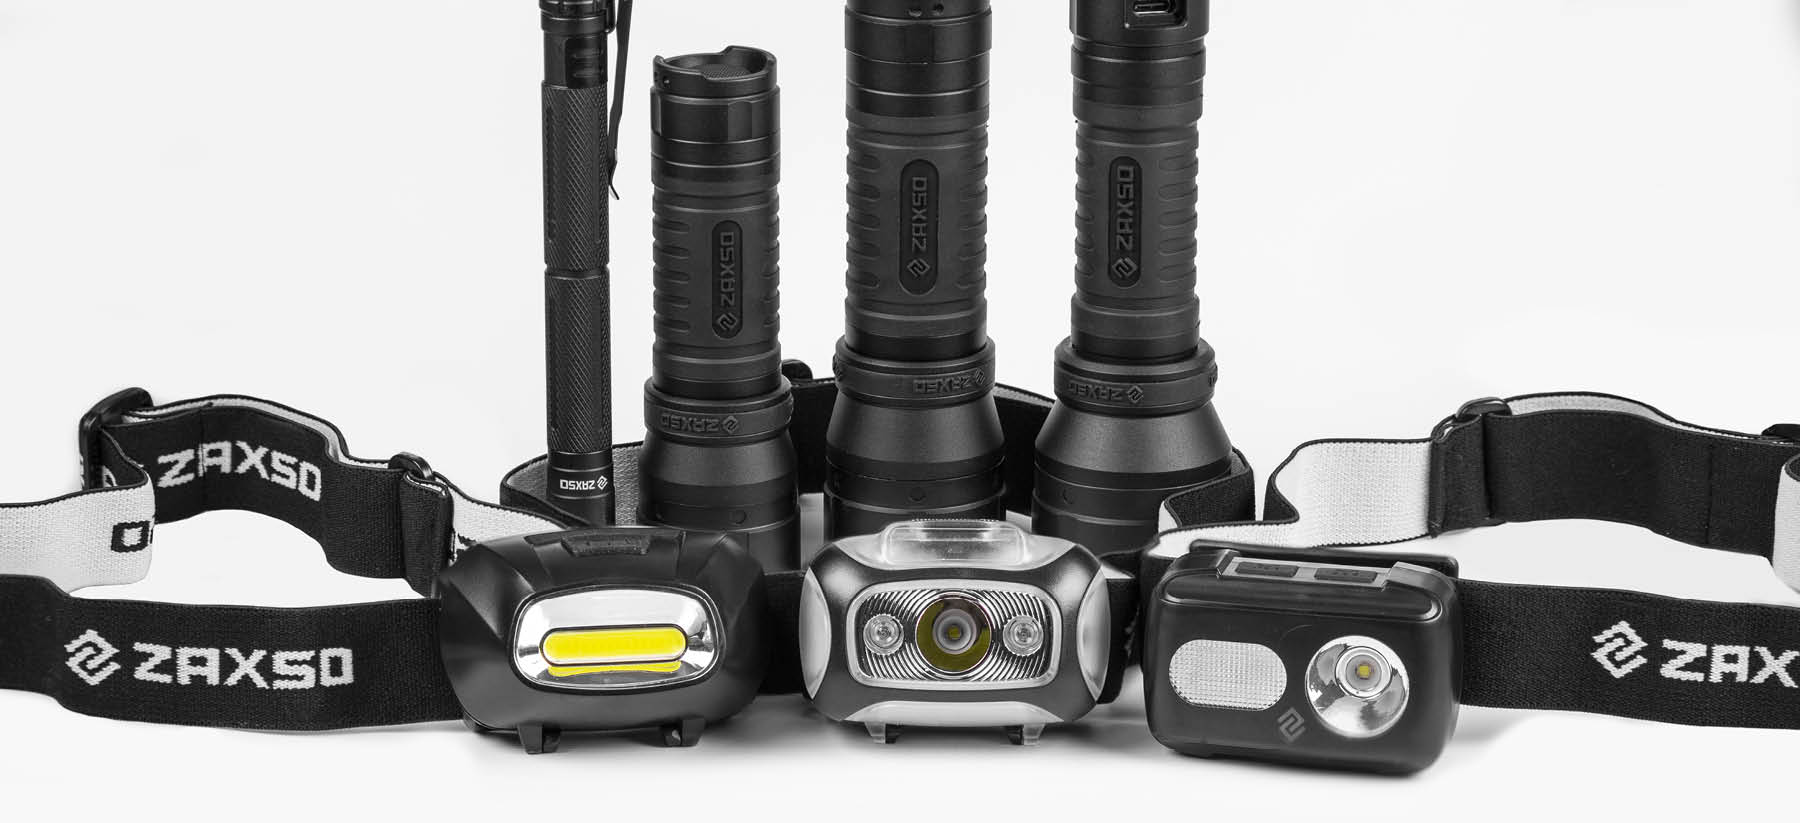 ZAXSO - Products - products: Lights Flashlights Headlamps Headlamps